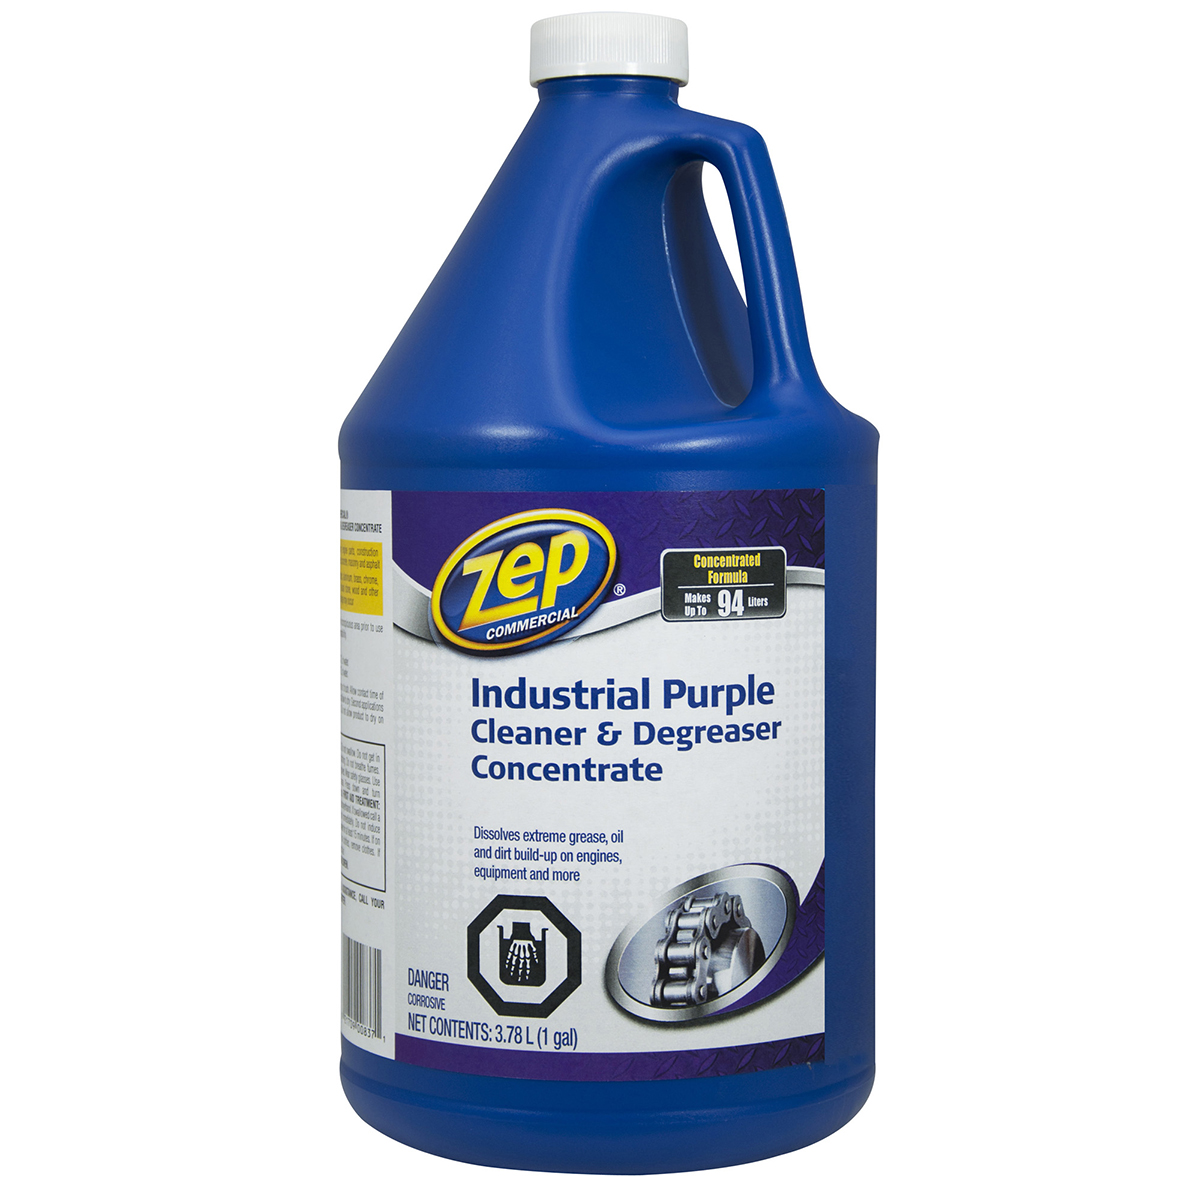 Zep Commercial Industrial Purple Cleaner & Degreaser Concentrate - 3.78 L